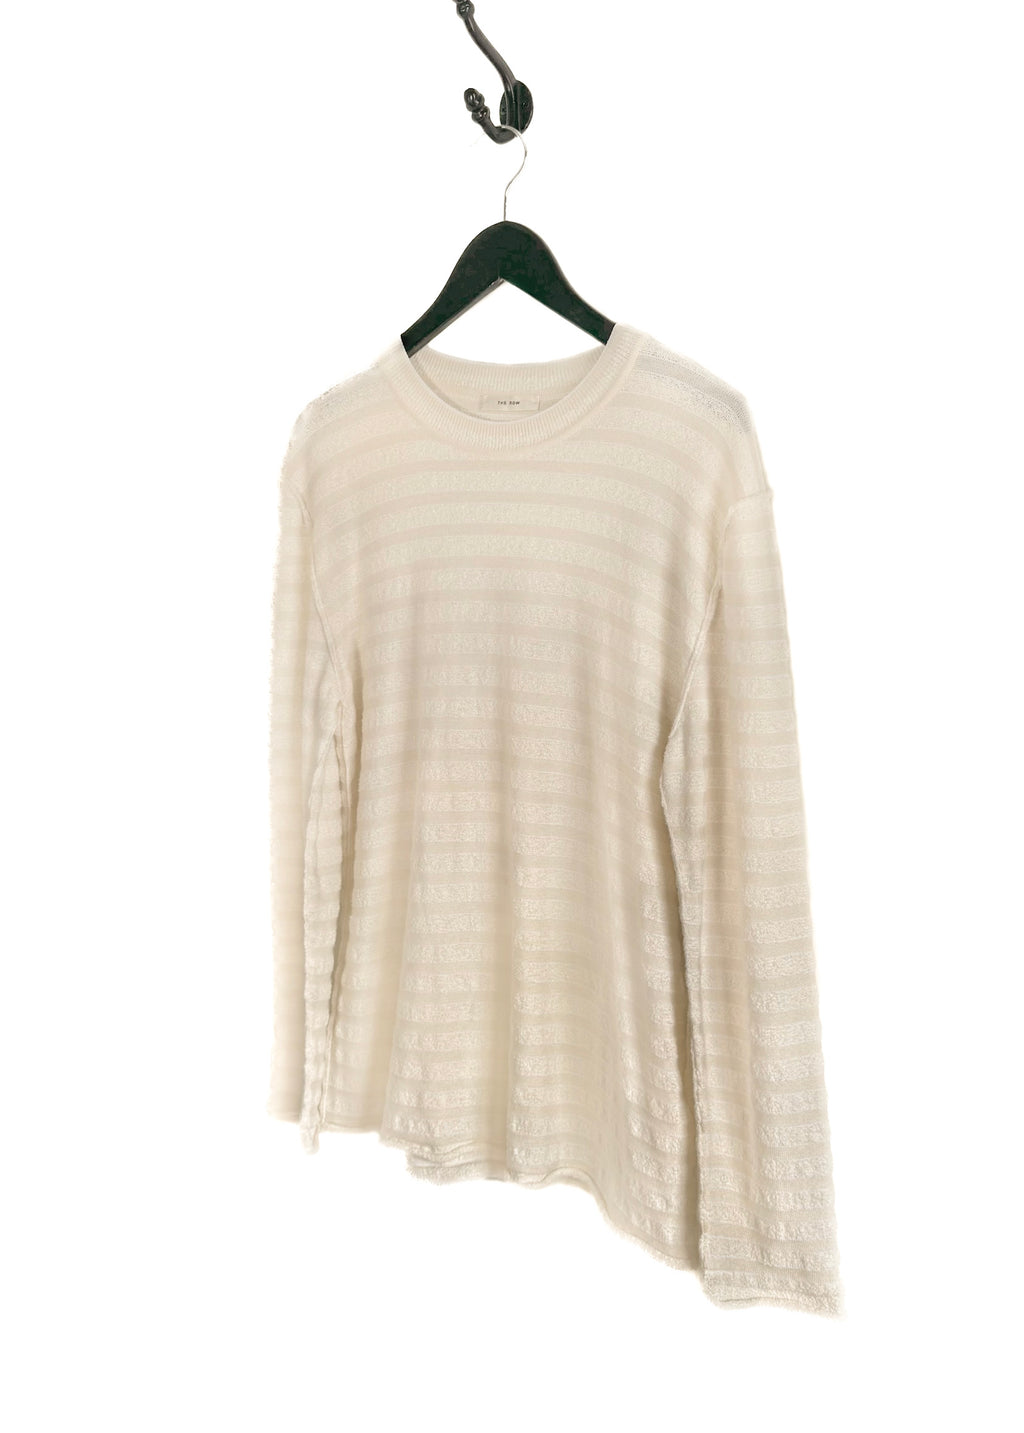 The Row Giusti Ivory Tonal Striped Cashmere Blend Knit Sweater